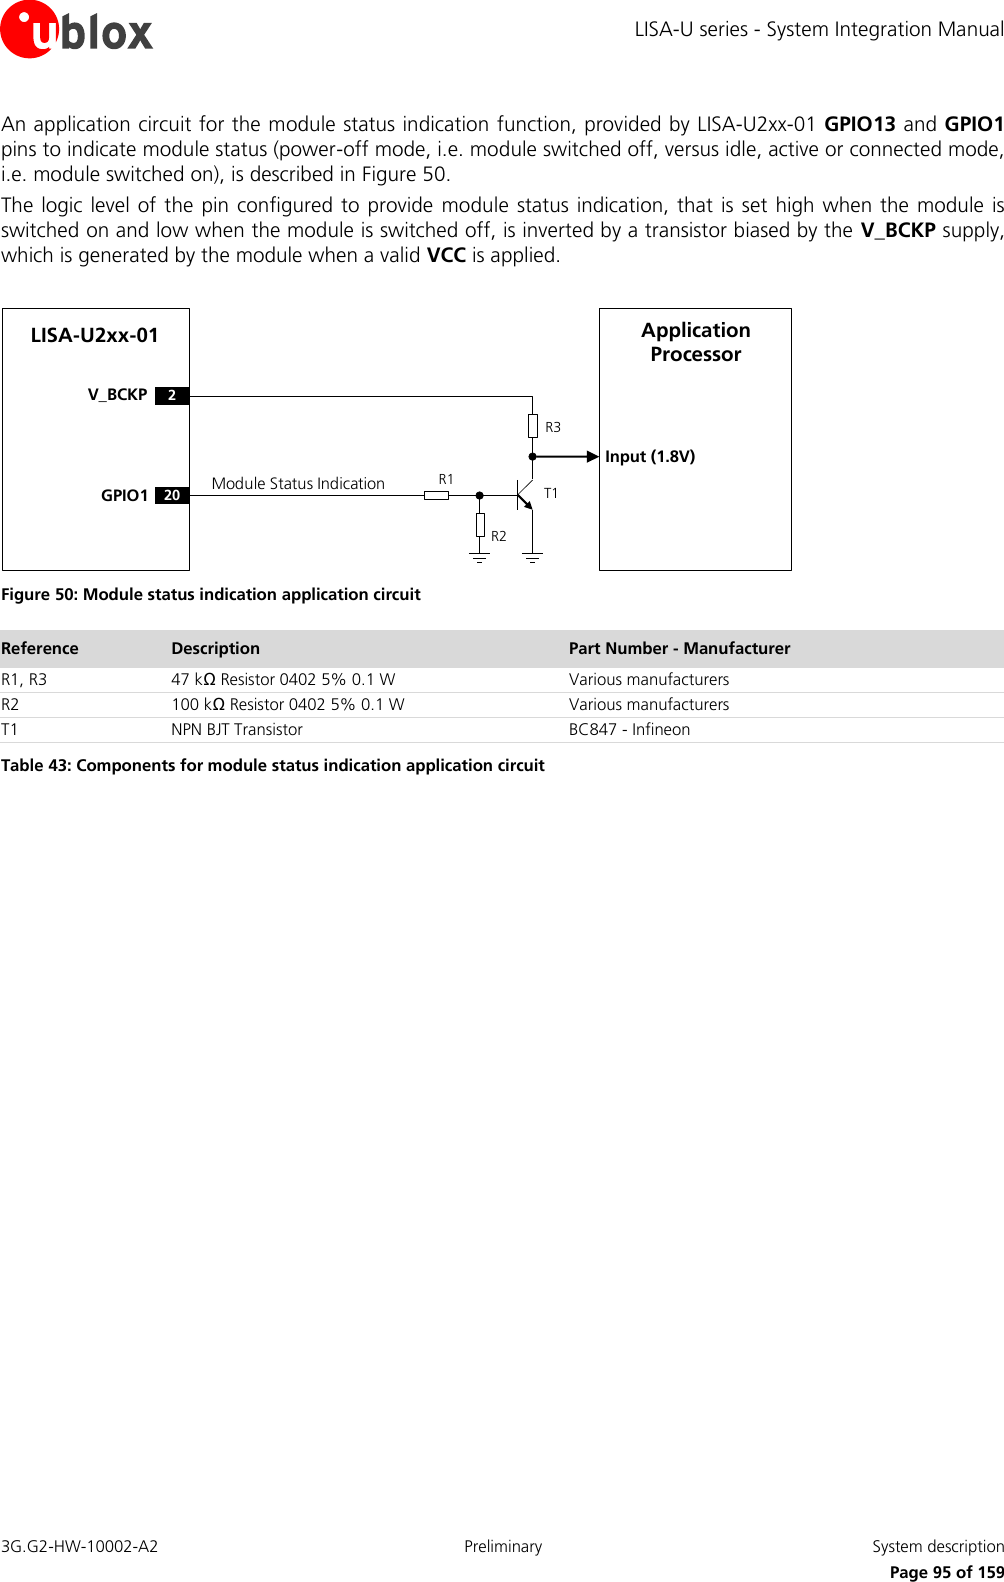 LISA-U series - System Integration Manual 3G.G2-HW-10002-A2  Preliminary  System description      Page 95 of 159 An application circuit for the module status indication function, provided by LISA-U2xx-01 GPIO13 and GPIO1 pins to indicate module status (power-off mode, i.e. module switched off, versus idle, active or connected mode, i.e. module switched on), is described in Figure 50. The logic level of the  pin  configured to provide  module status indication, that  is set high when the module is switched on and low when the module is switched off, is inverted by a transistor biased by the V_BCKP supply, which is generated by the module when a valid VCC is applied.  Input (1.8V)V_BCKP 2LISA-U2xx-01 Application ProcessorR1R3Module Status IndicationR220GPIO1 T1 Figure 50: Module status indication application circuit Reference Description Part Number - Manufacturer R1, R3 47 kΩ Resistor 0402 5% 0.1 W Various manufacturers R2 100 kΩ Resistor 0402 5% 0.1 W Various manufacturers T1 NPN BJT Transistor  BC847 - Infineon Table 43: Components for module status indication application circuit  